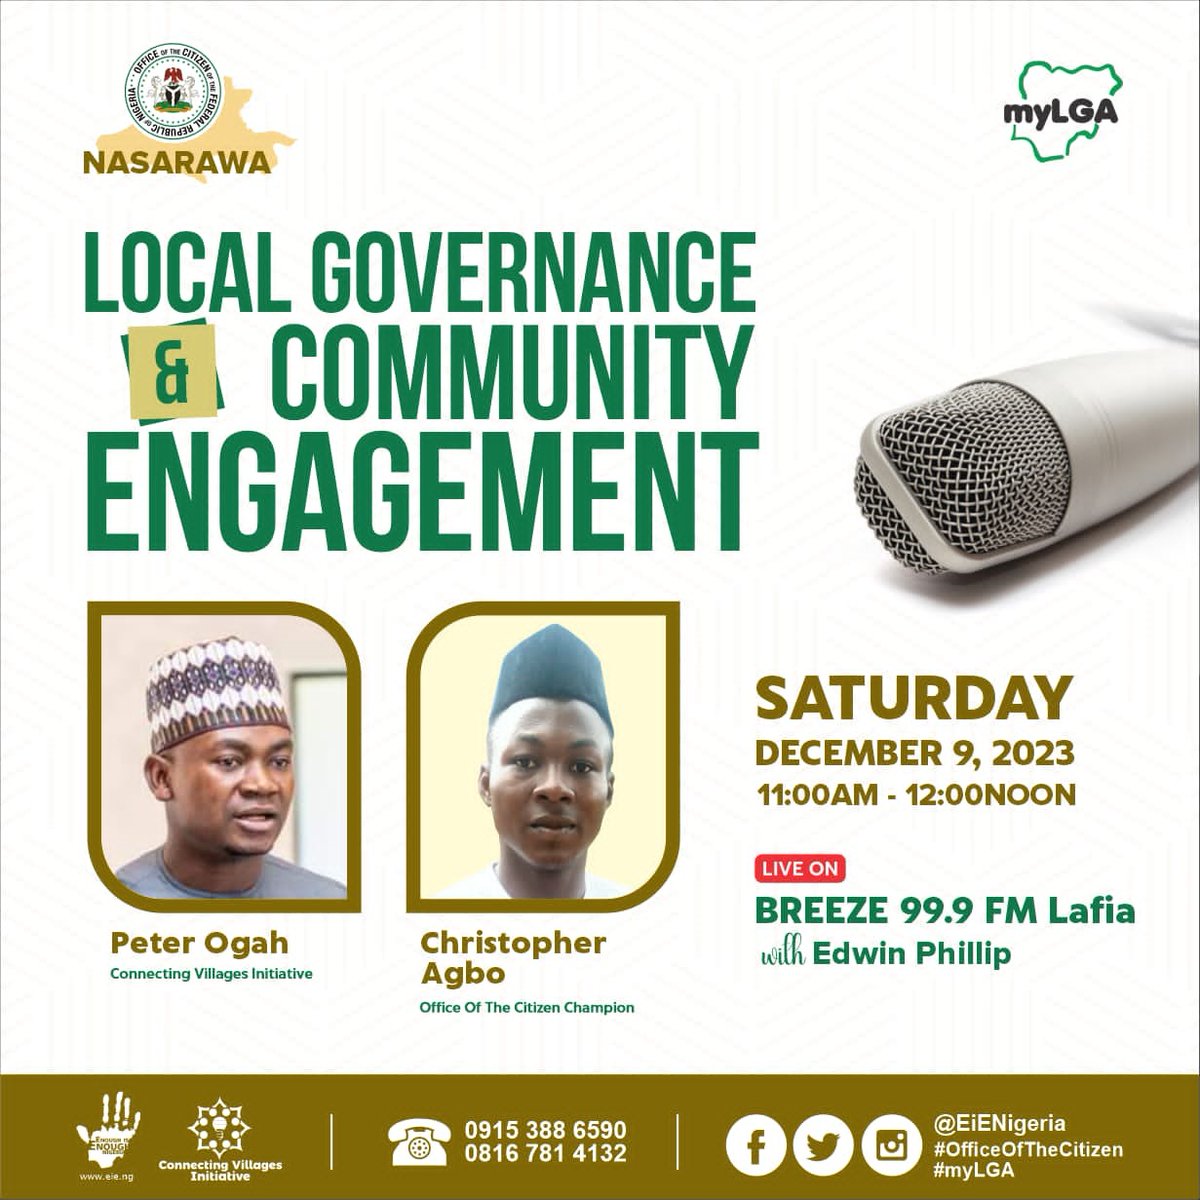 Dear friends, my friend Christopher O Agbo  and I will be on air at Breezefm Lafia  this Saturday, 9th November 2023 to speak on the topic 'local governance & community engagement'. Please join and engage as much as possible.